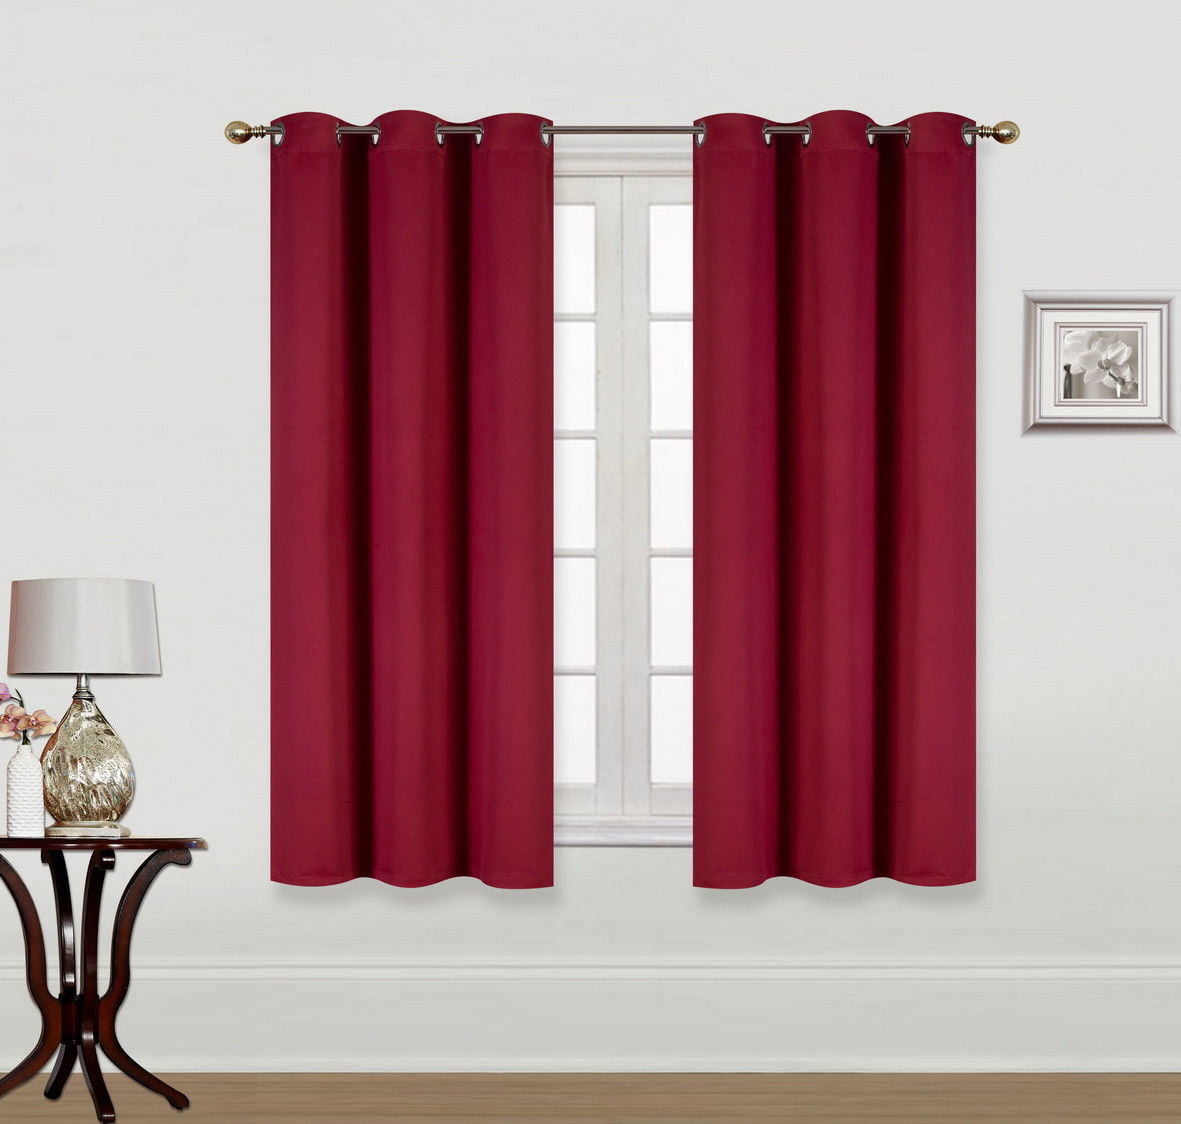 DREAM ART Anti-Microbial Super Soft Thermal Insulated Curtain/Drape for Nursery,Children Kids Bedroom Eyelet Blackout Curtains for Livingroom Energy Saving Noise Reducting 52x63-2panels, Burgundy